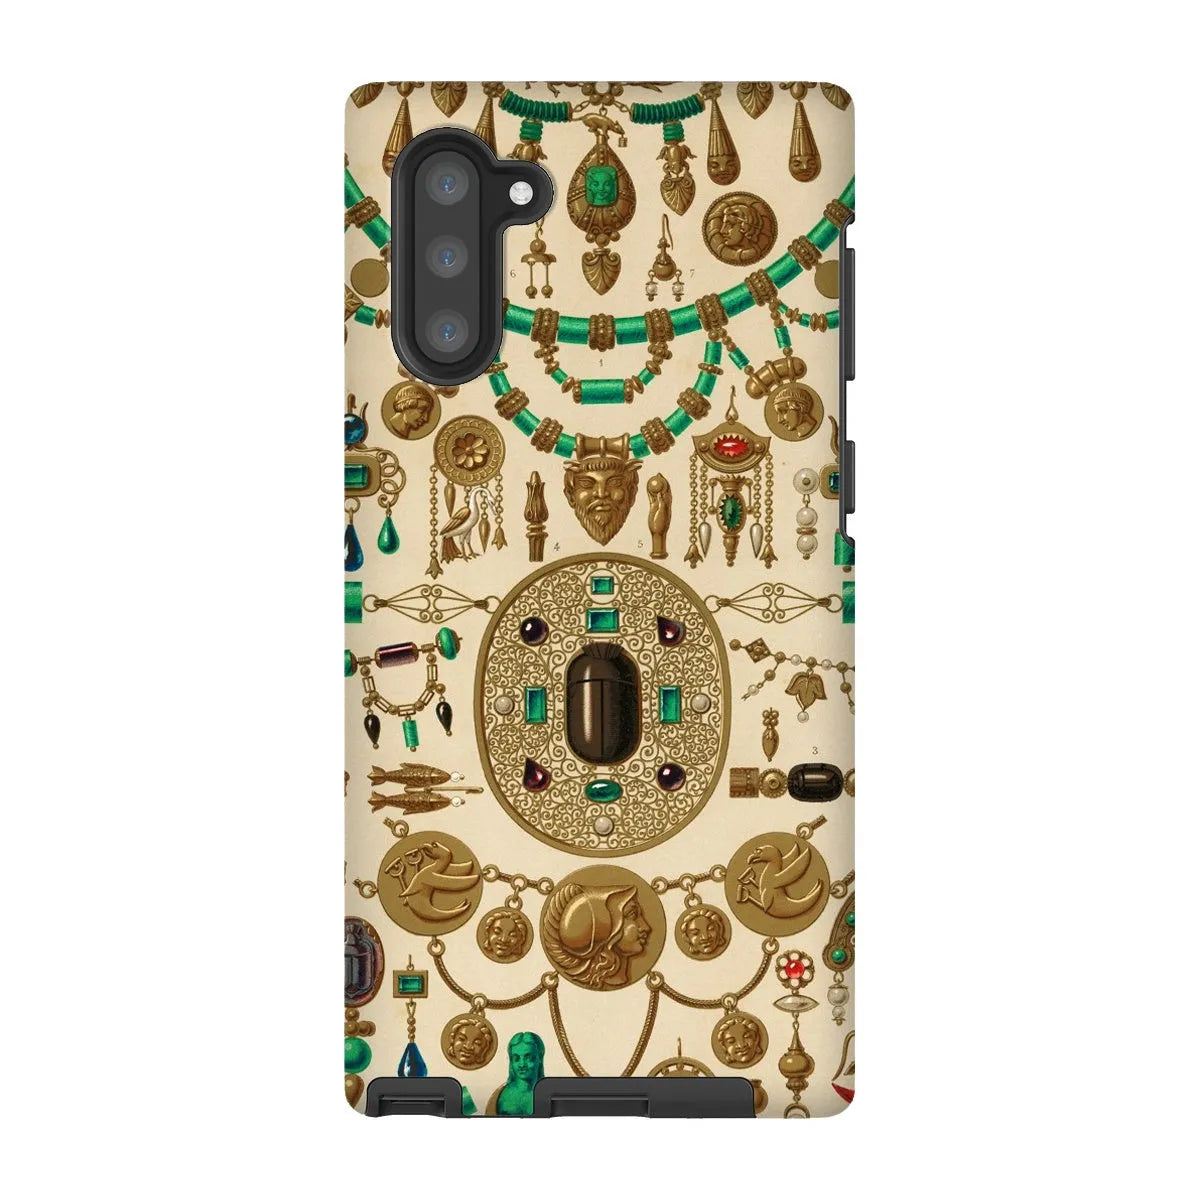 Etruscan Jewelry By Auguste Racinet Art Phone Case - Samsung Galaxy Note 10 / Matte - Mobile Phone Cases - Aesthetic Art